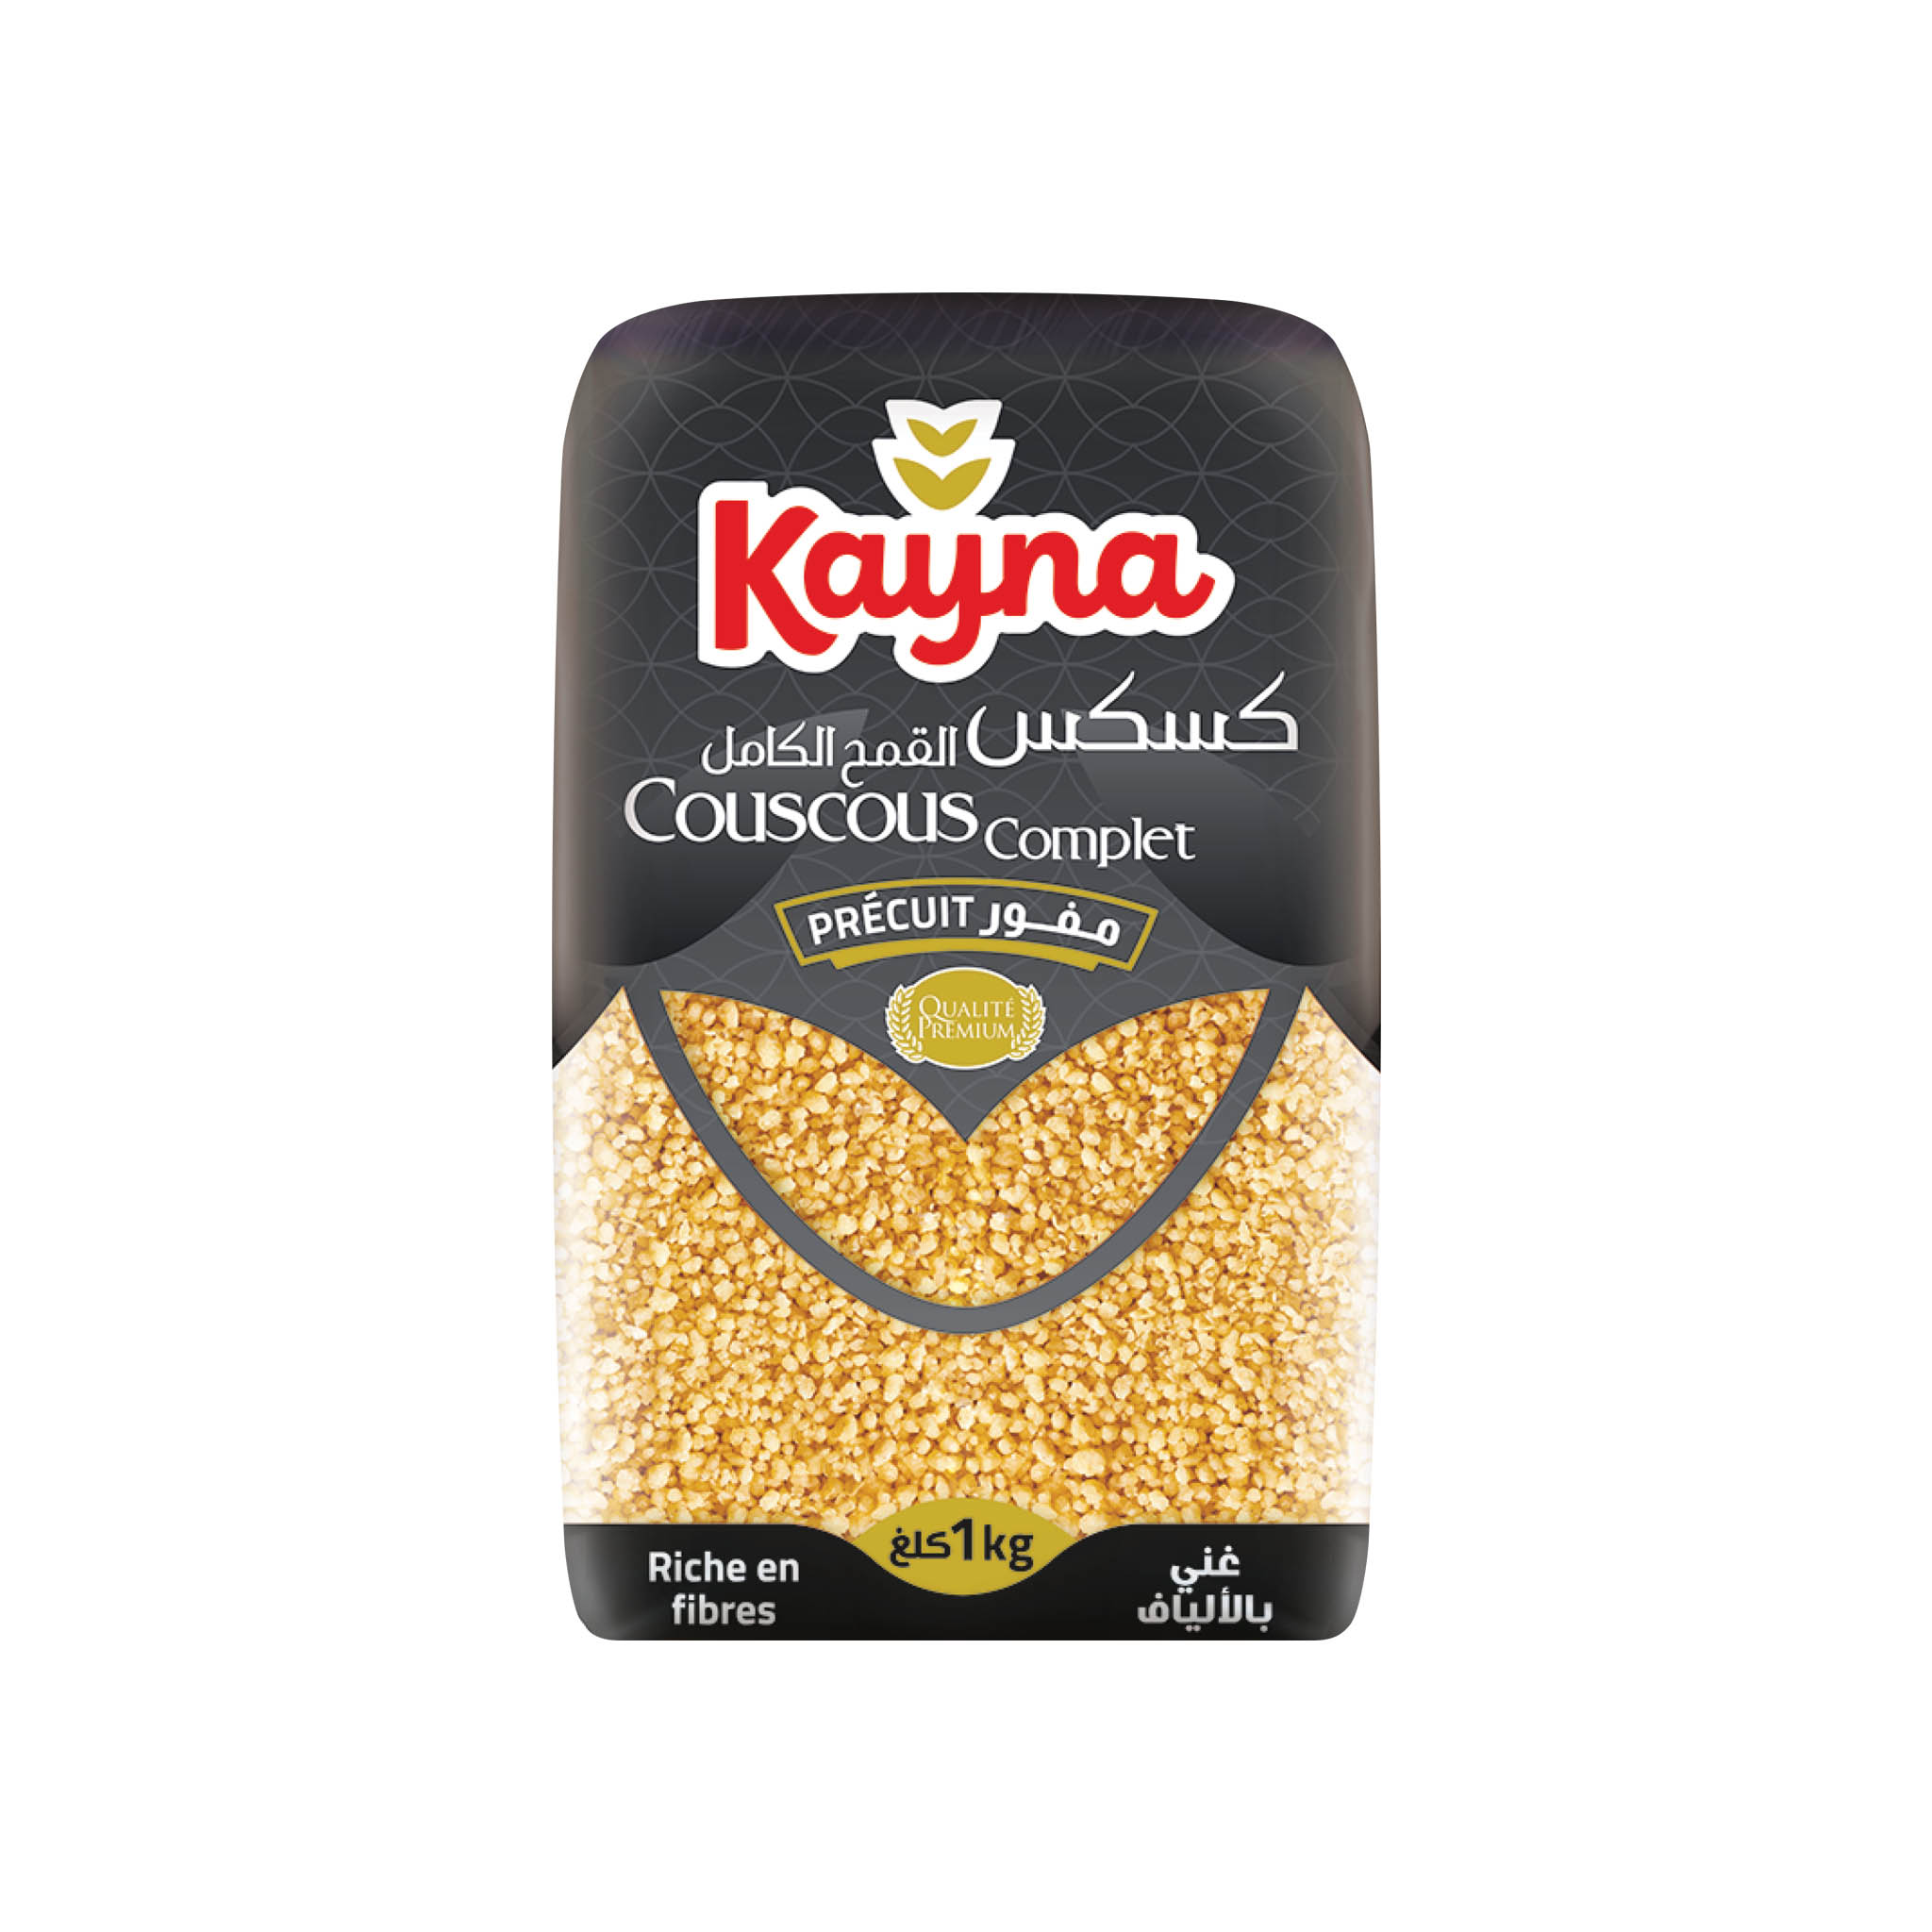 KAYNA Couscous Complet 1Kg - PRODUCT